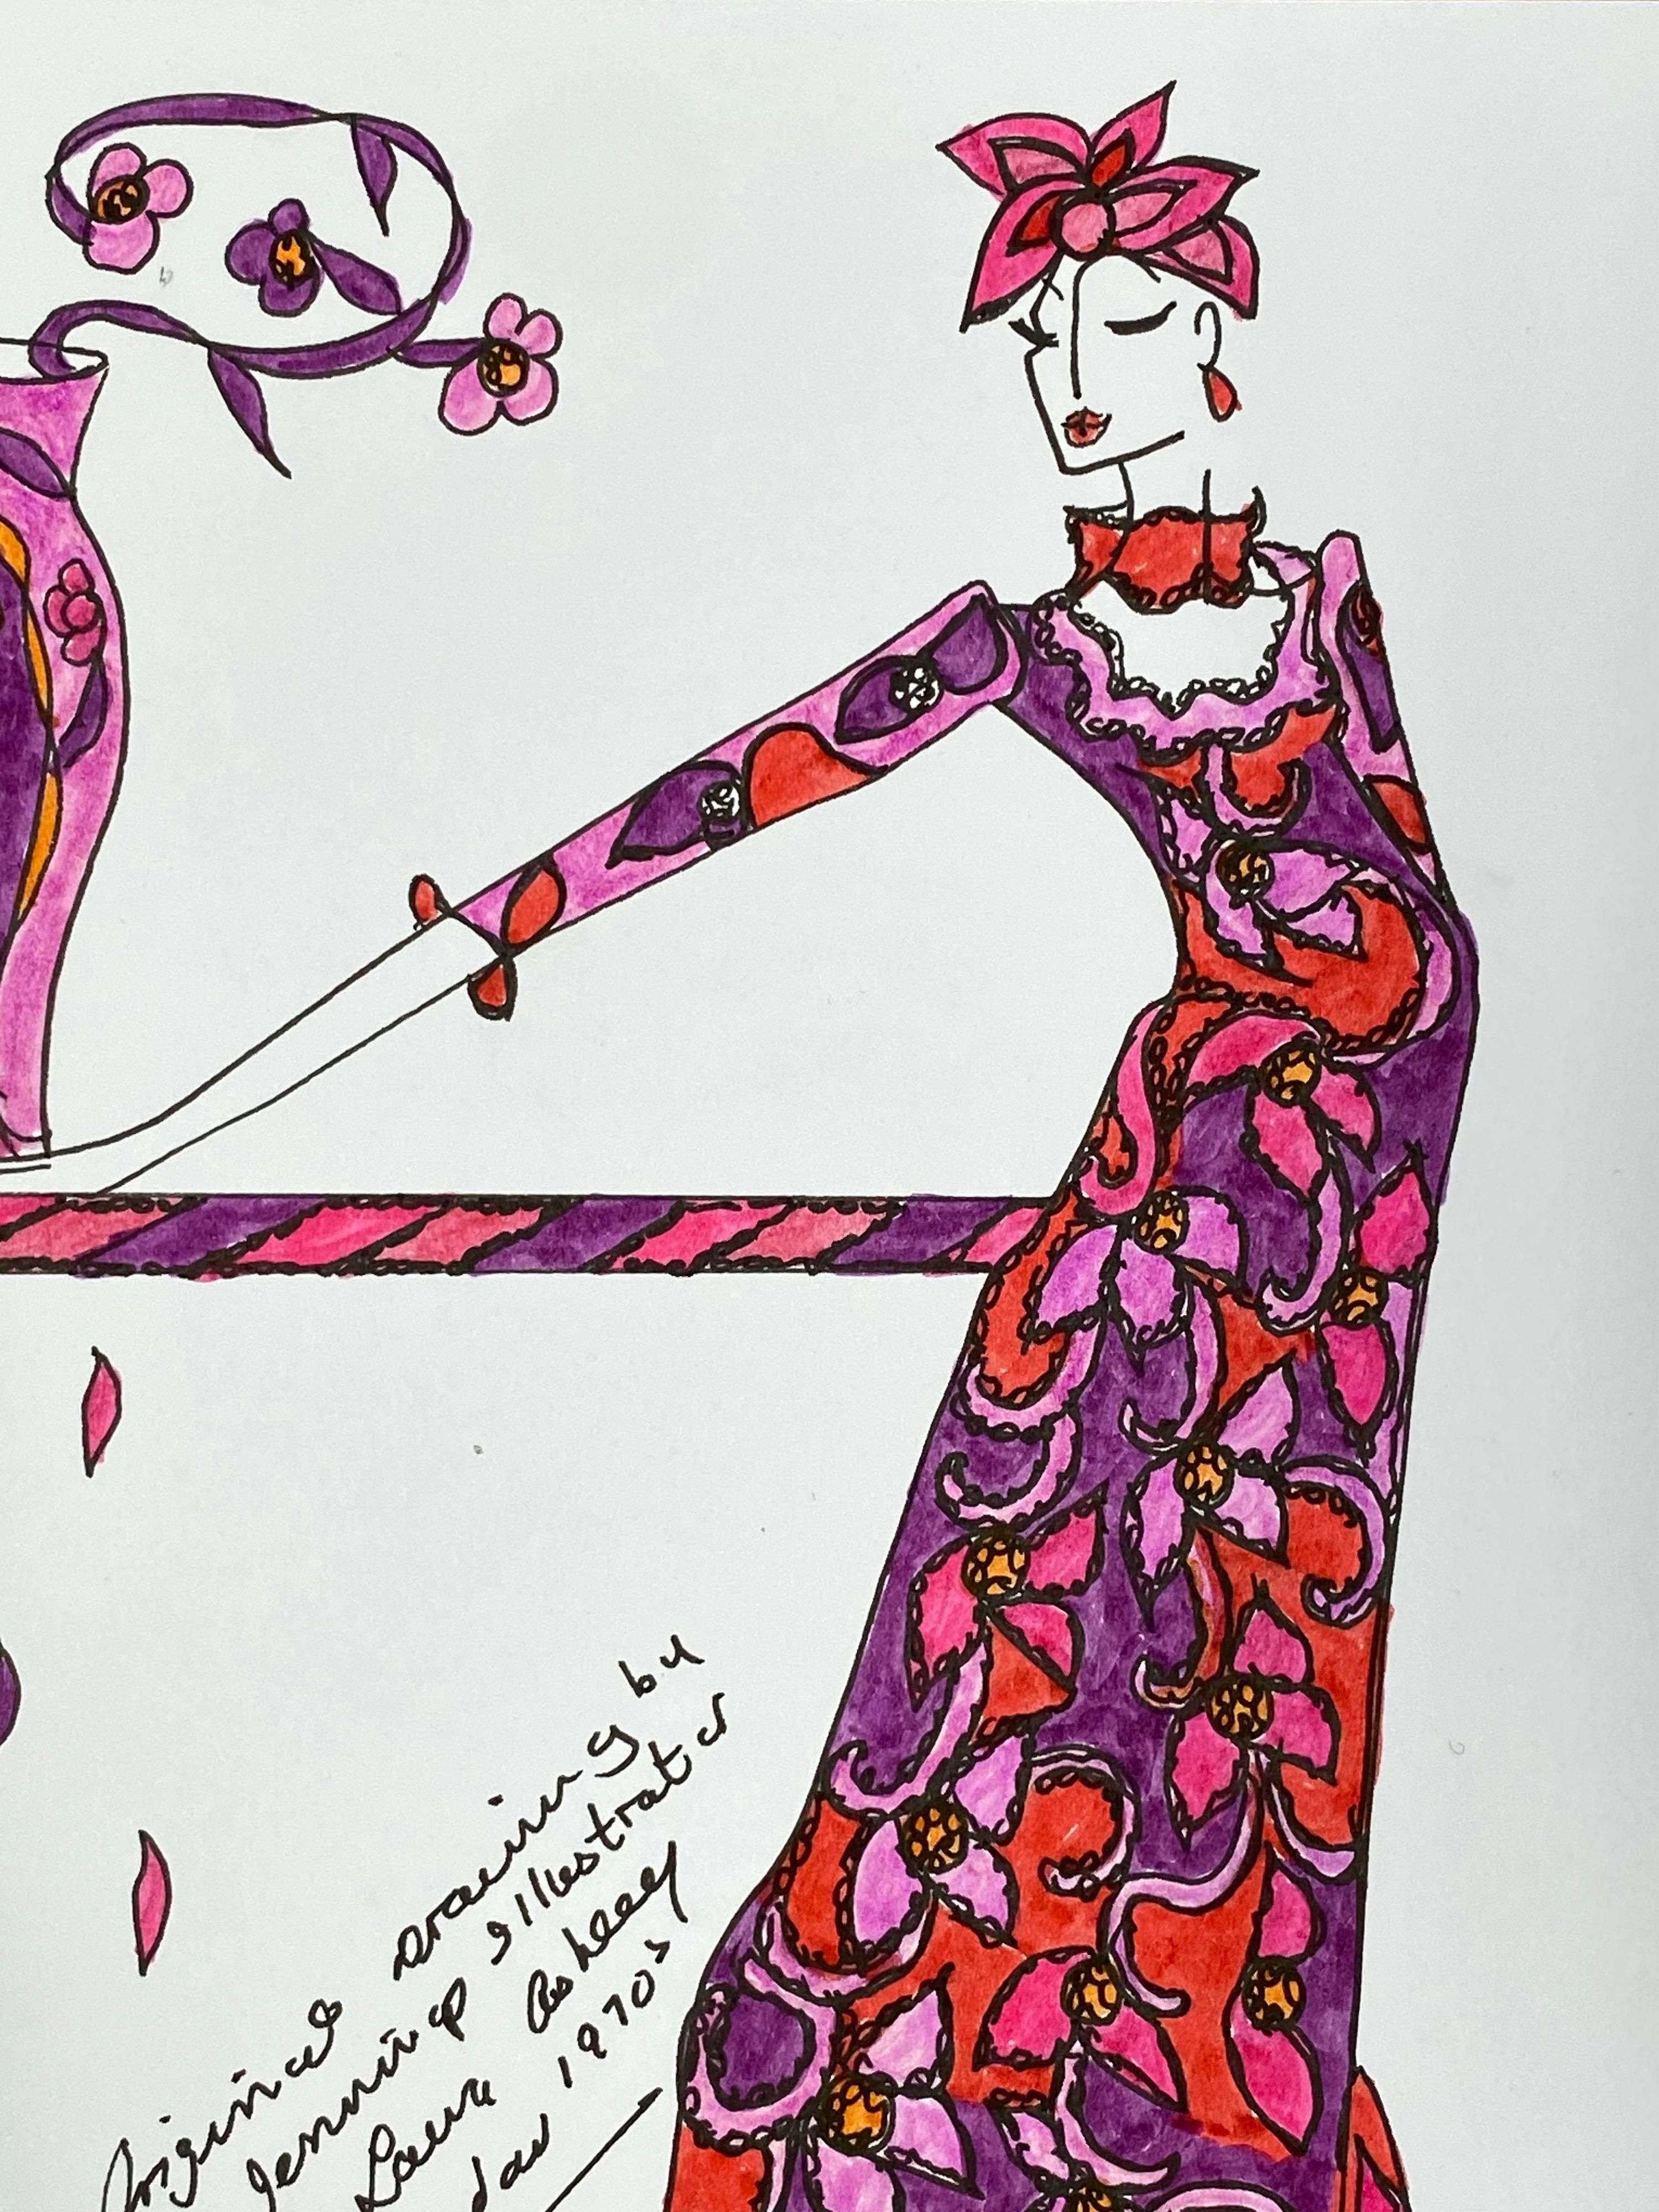 Original fashion design illustration
by Roz Jennings, British
watercolor and ink on card, unframed
size: 12 x 8.25 inches
condition: very good

A beautifully colorful and characterful original artwork by British fashion designer, Roz Jennings.